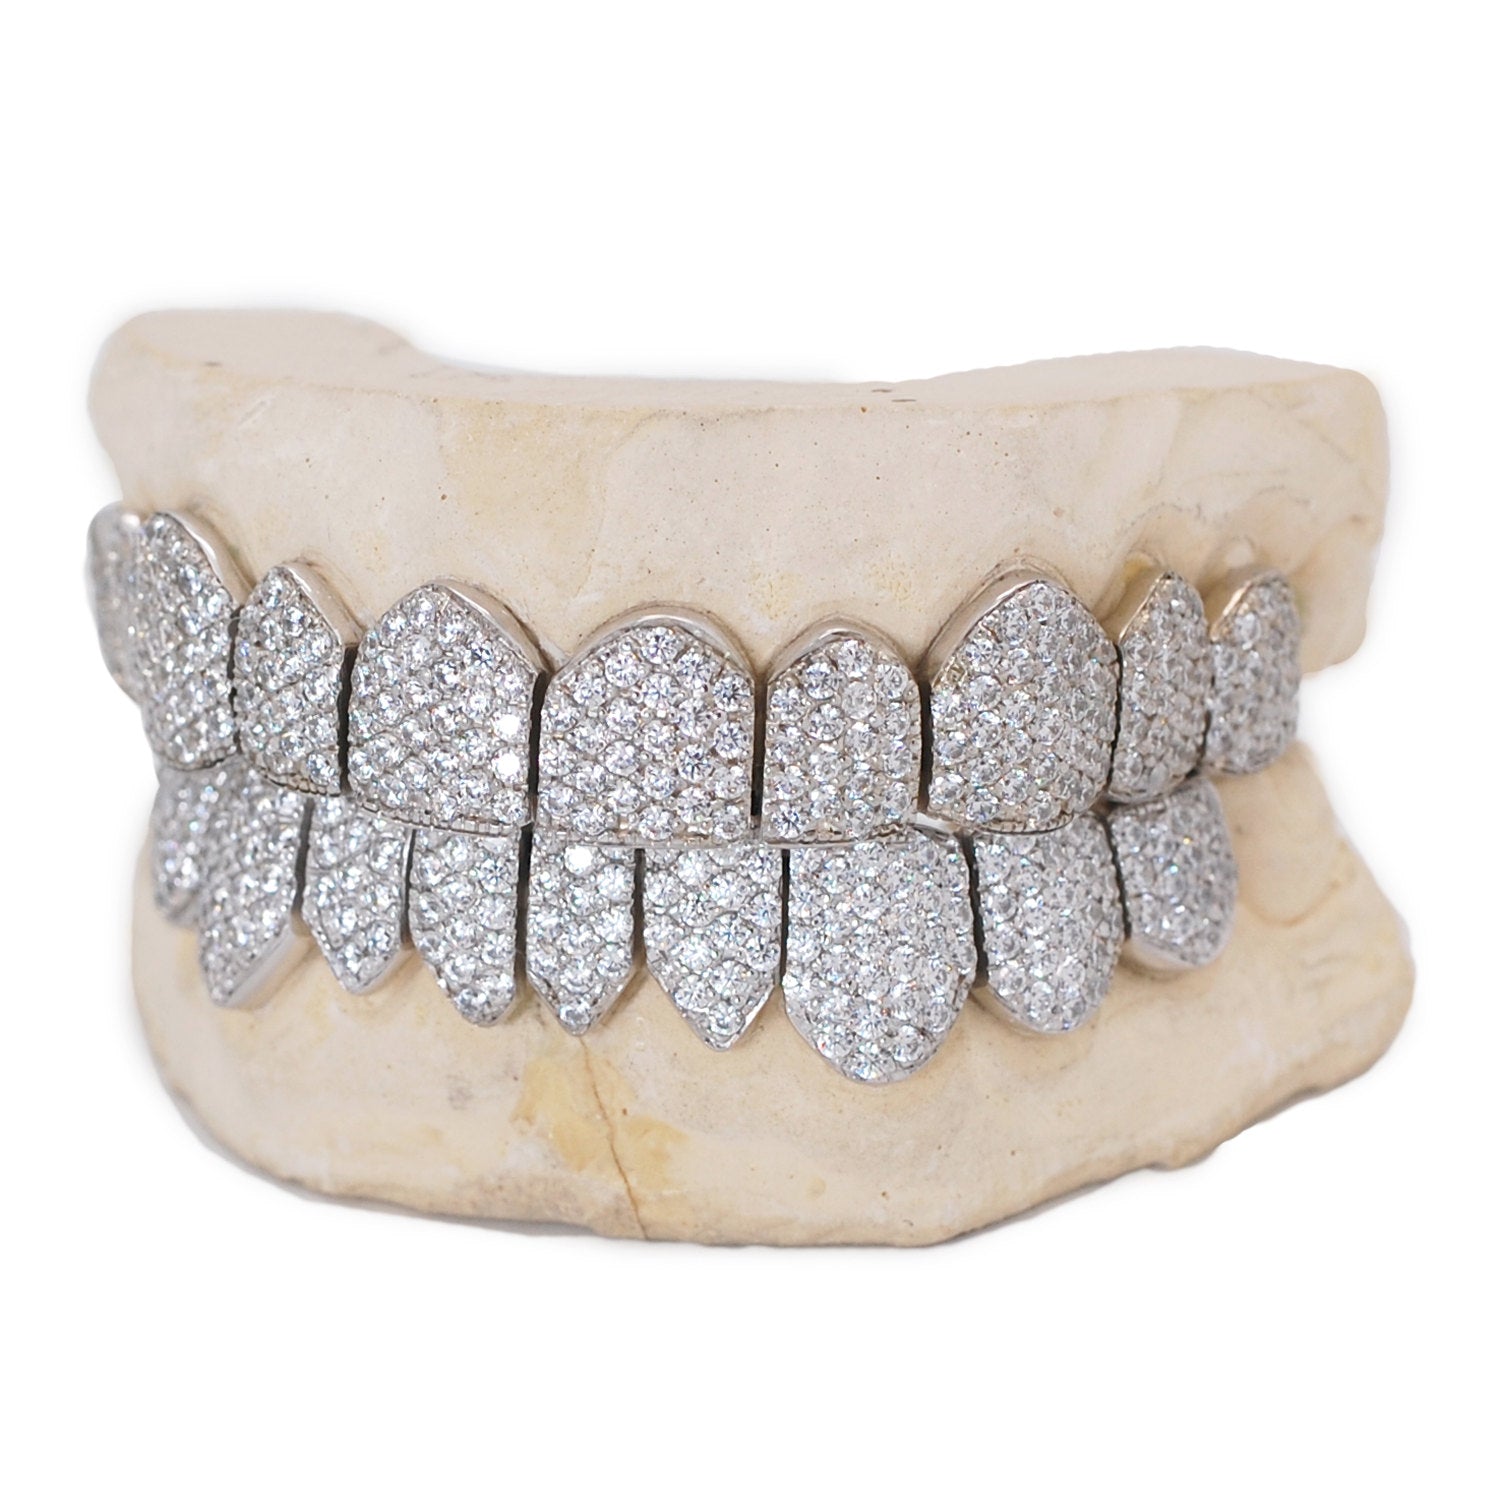 Shine bright with our diamond grillz, encrusted with high-quality diamonds for the ultimate in luxury and style